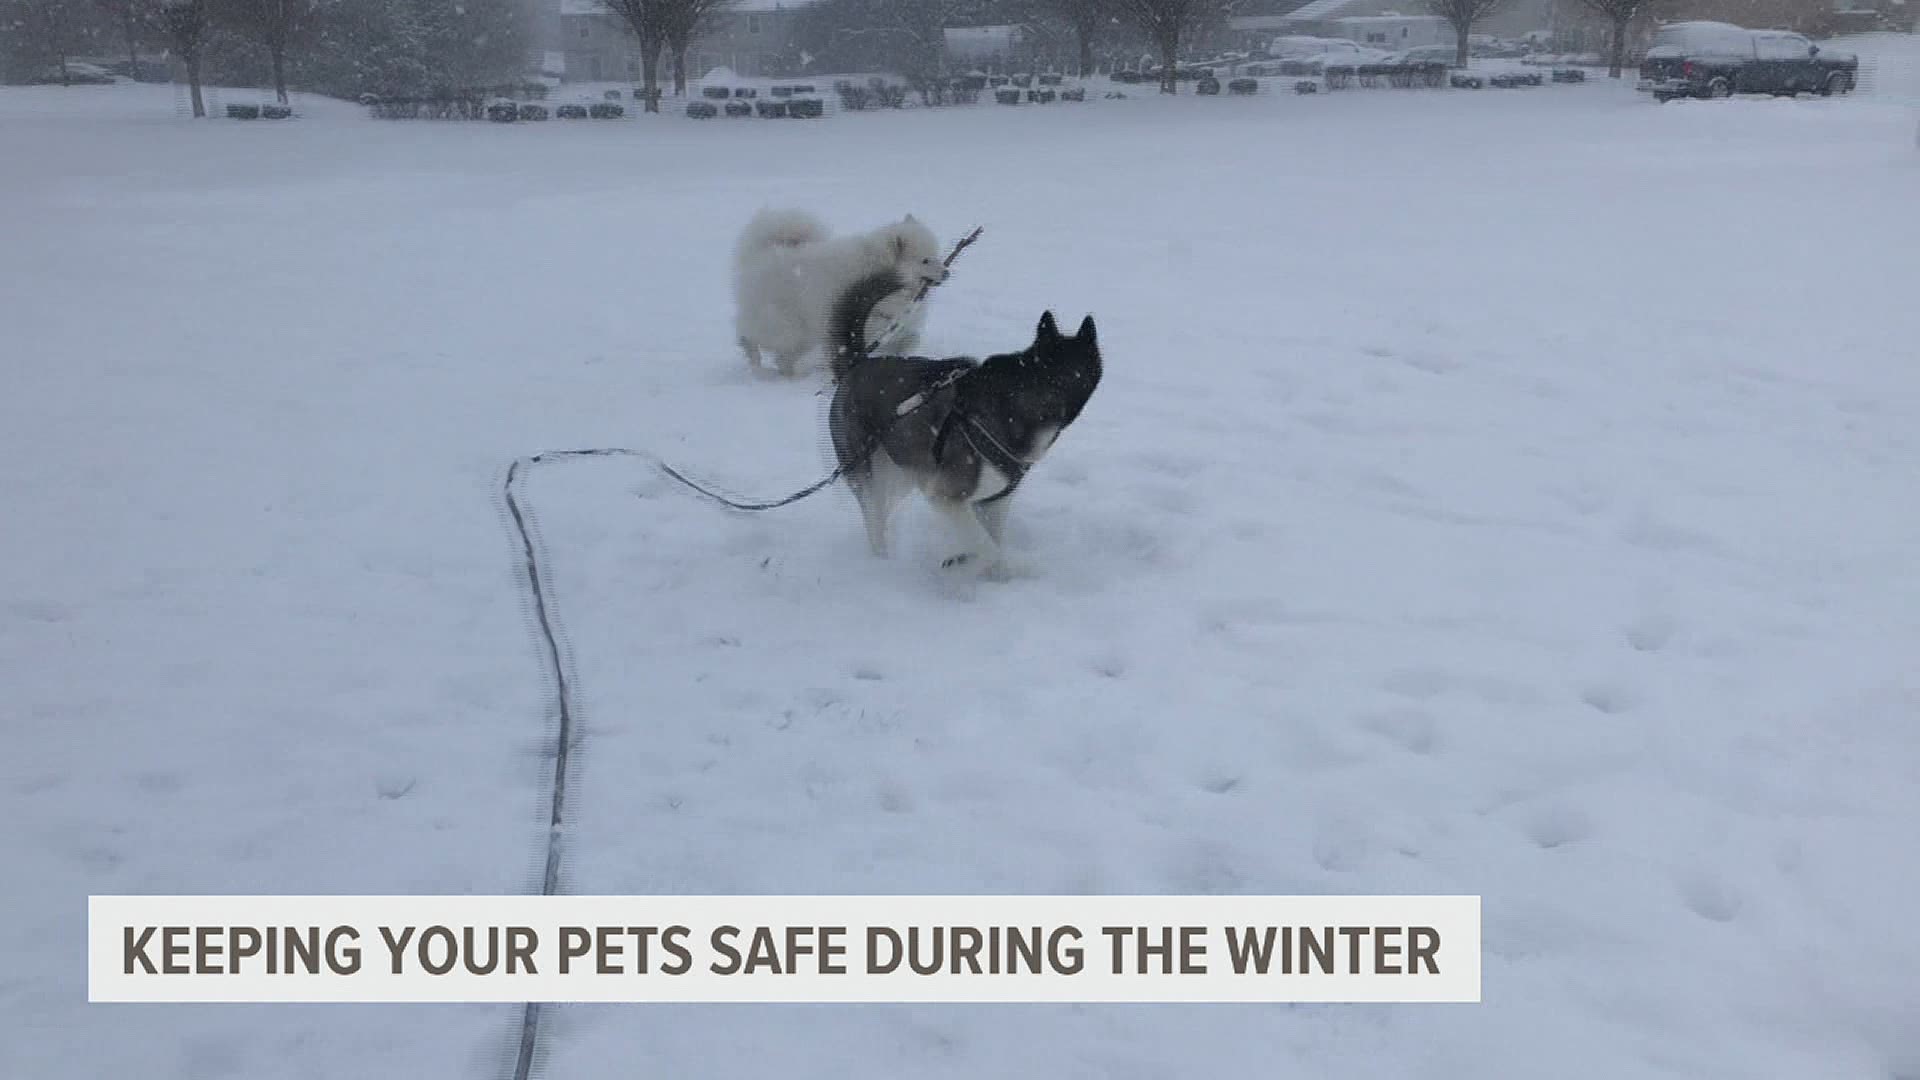 With the coldest air of the season set to arrive next week, it's important to check in and make sure your pets are staying warm.